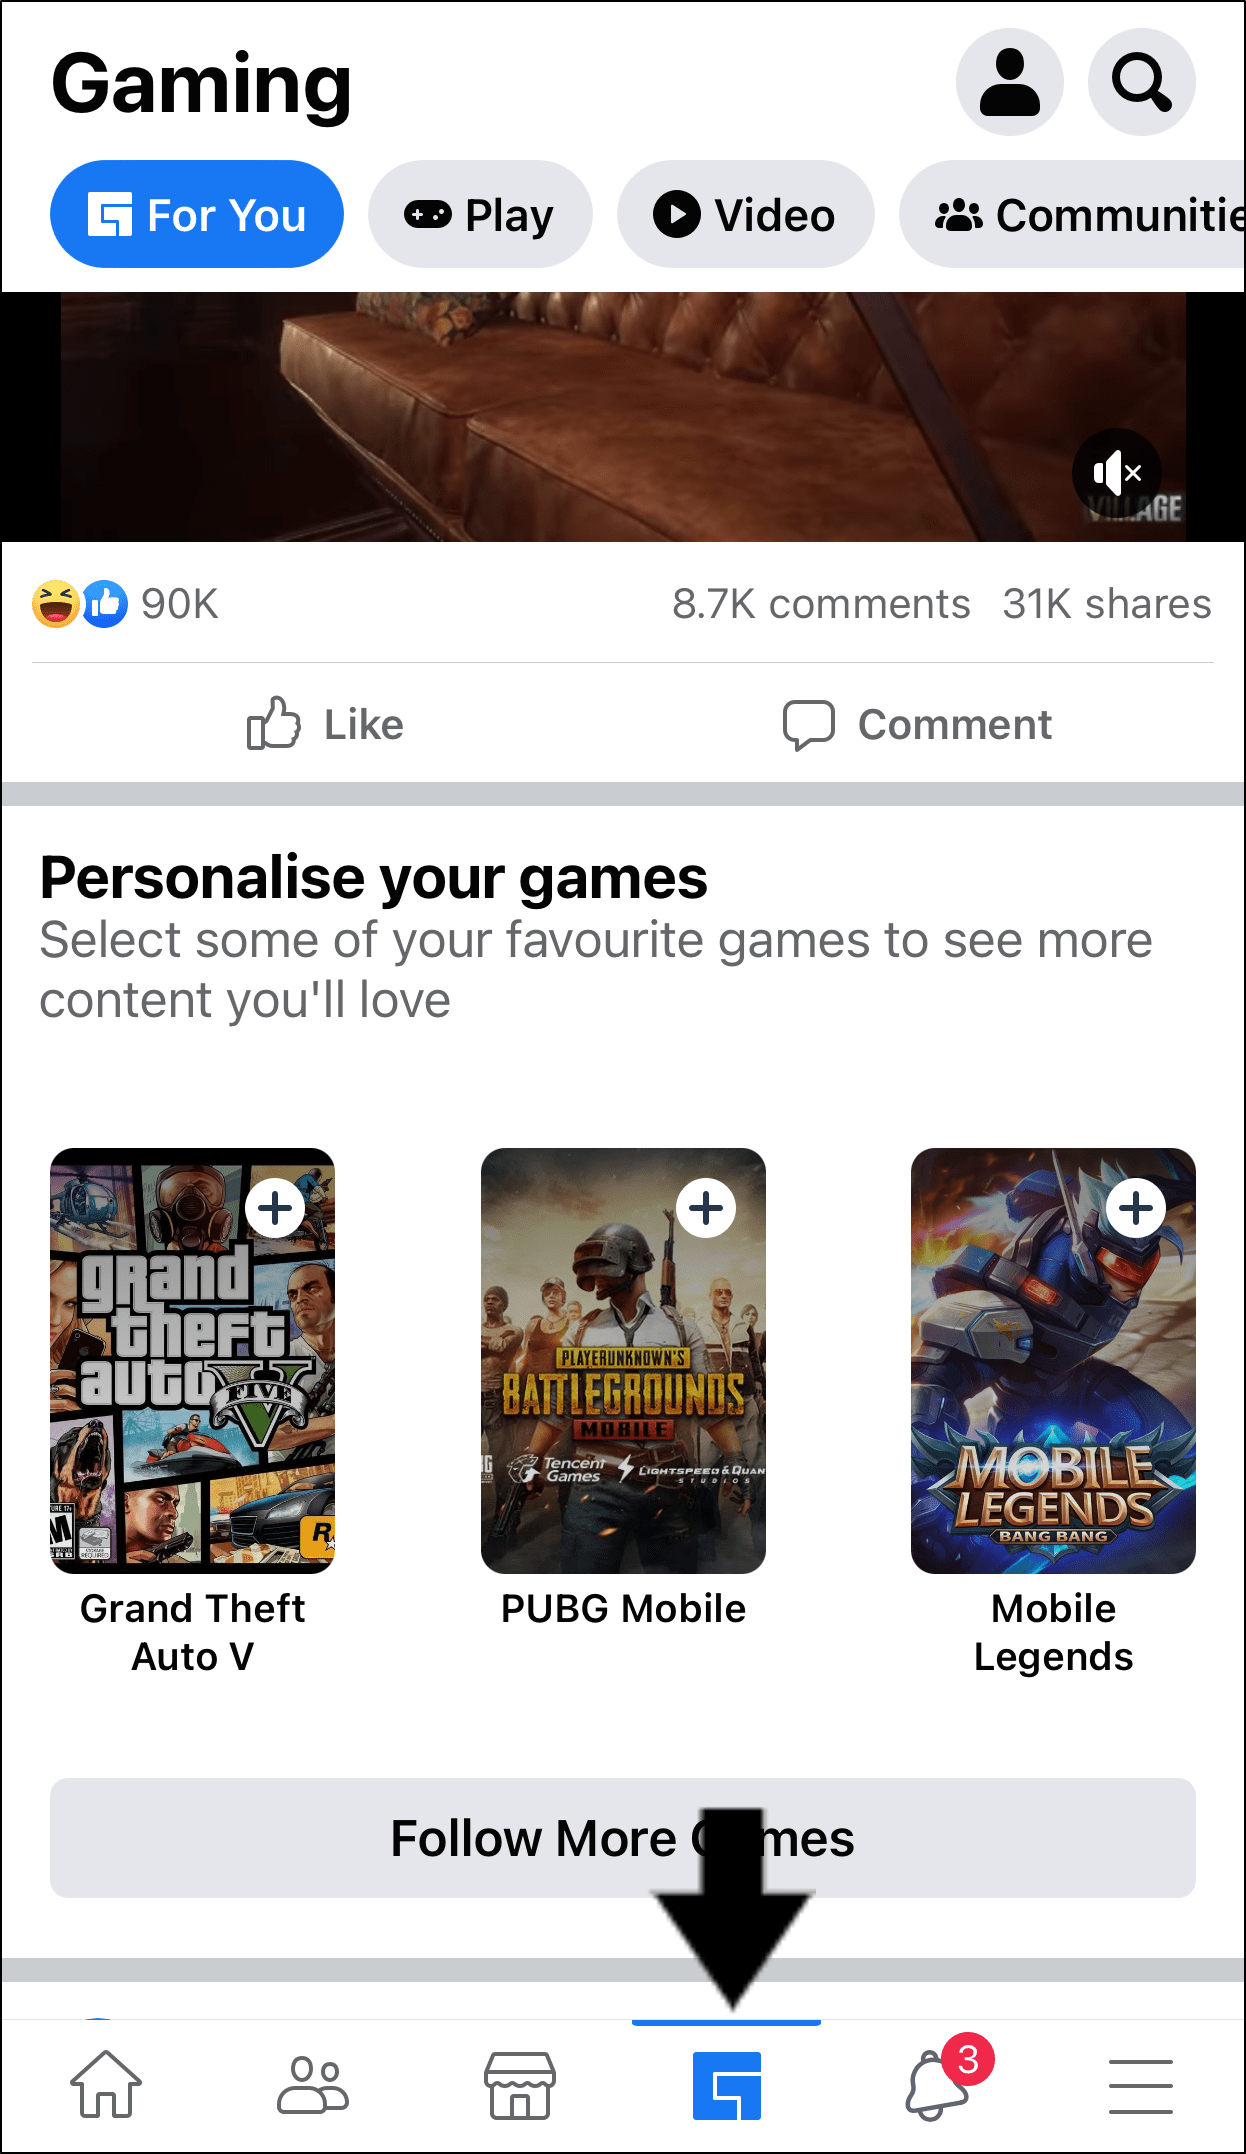 access Facebook Gaming through Facebook app on iPhone or Android